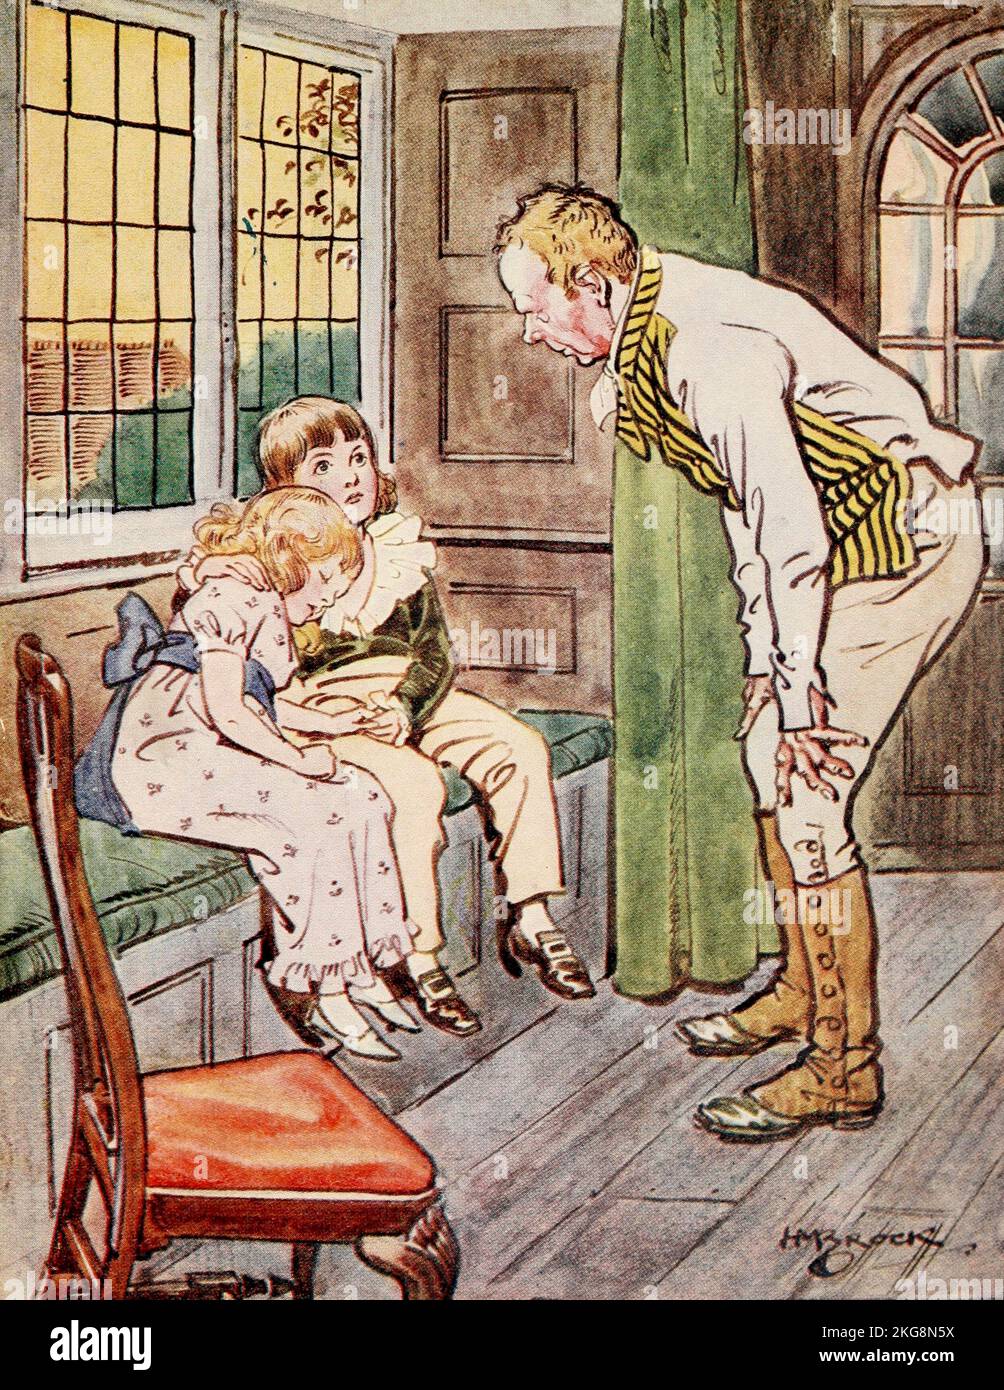 Mrs. Harry Walmers, Junior, fatigued. Colour illustration by H. M. Brock from the book ' The Holly-Tree Inn ' by Charles Dickens, 1812-1870 Publication date 1856 Publisher London : Hodder & Stoughton Stock Photo